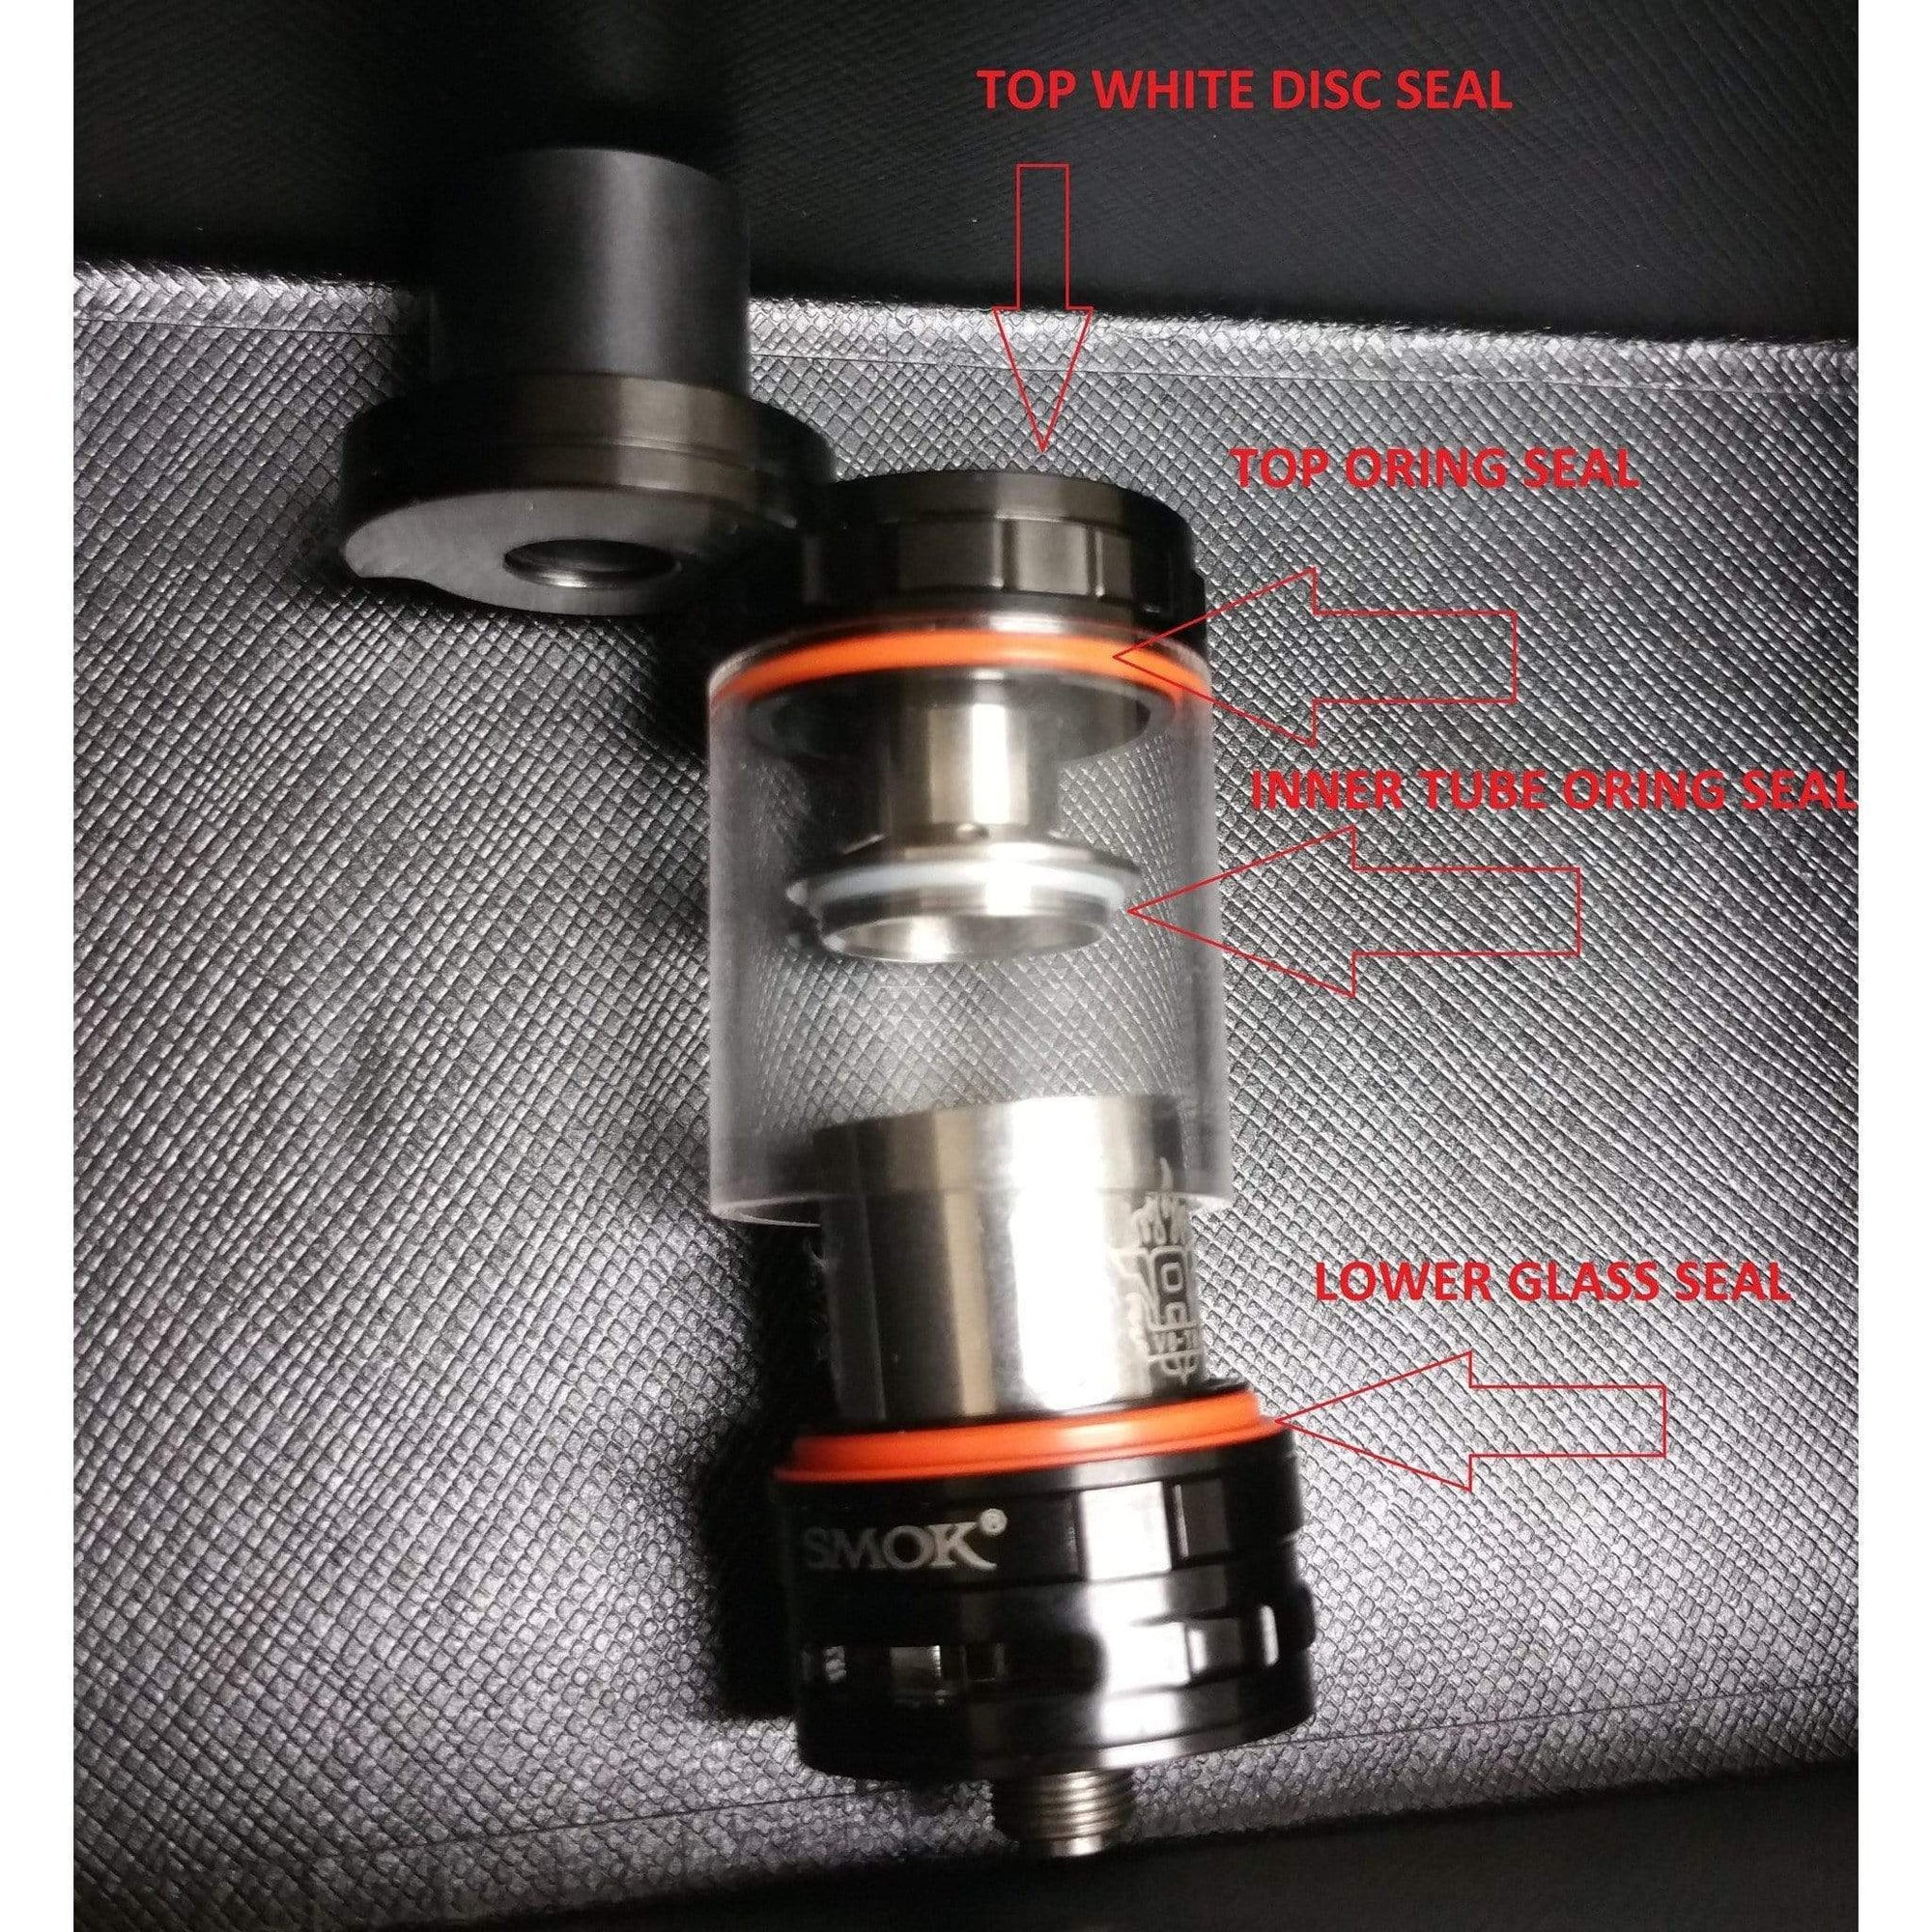 TFV8 Baby Beast Replacement Seals Seals/Oring's